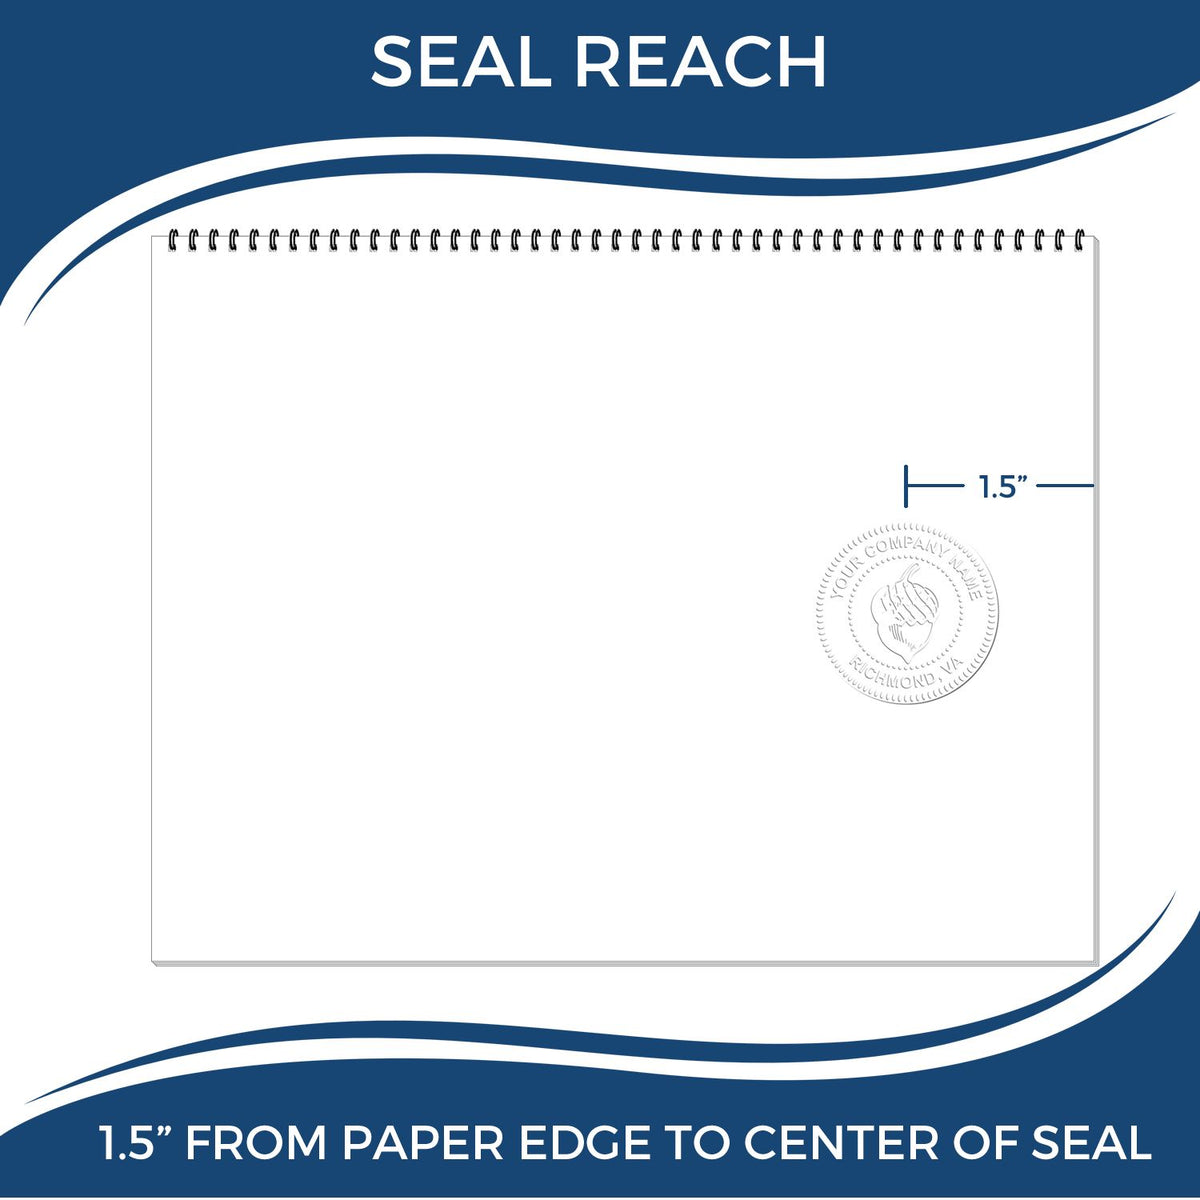 An infographic showing the seal reach which is represented by a ruler and a miniature seal image of the Soft Massachusetts Professional Engineer Seal